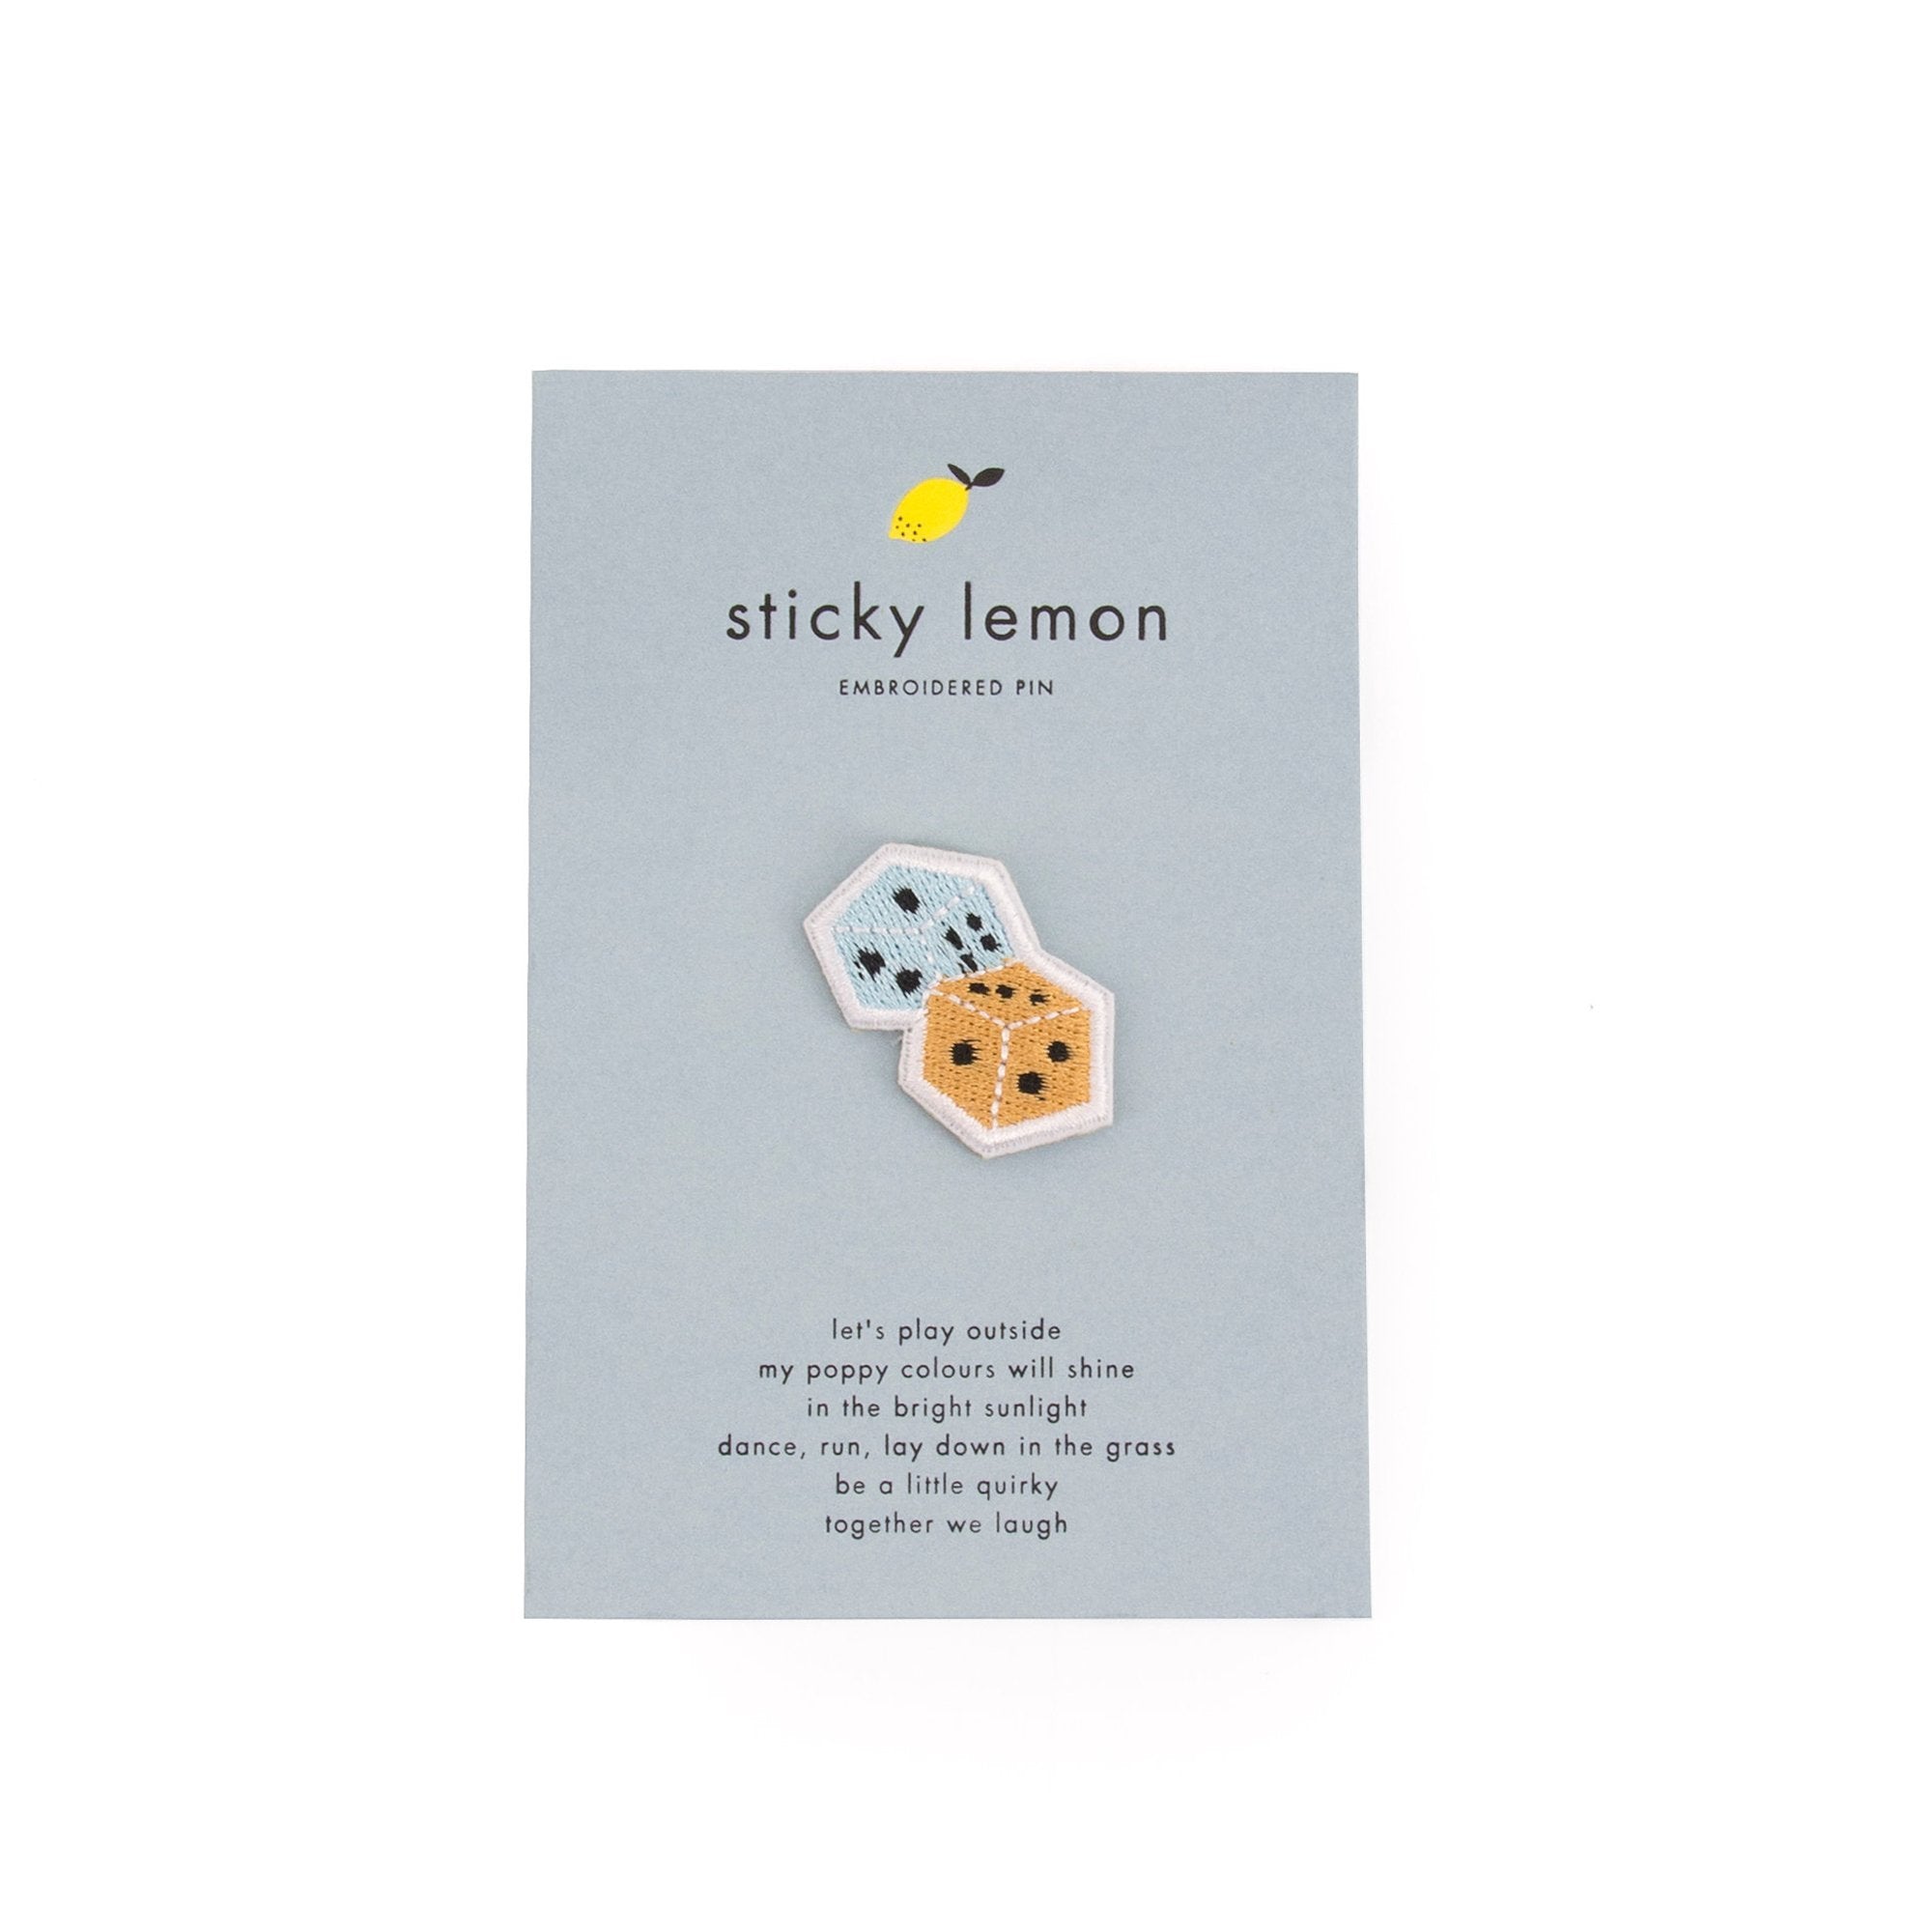 Sticky lemon Embroidered pins Dice